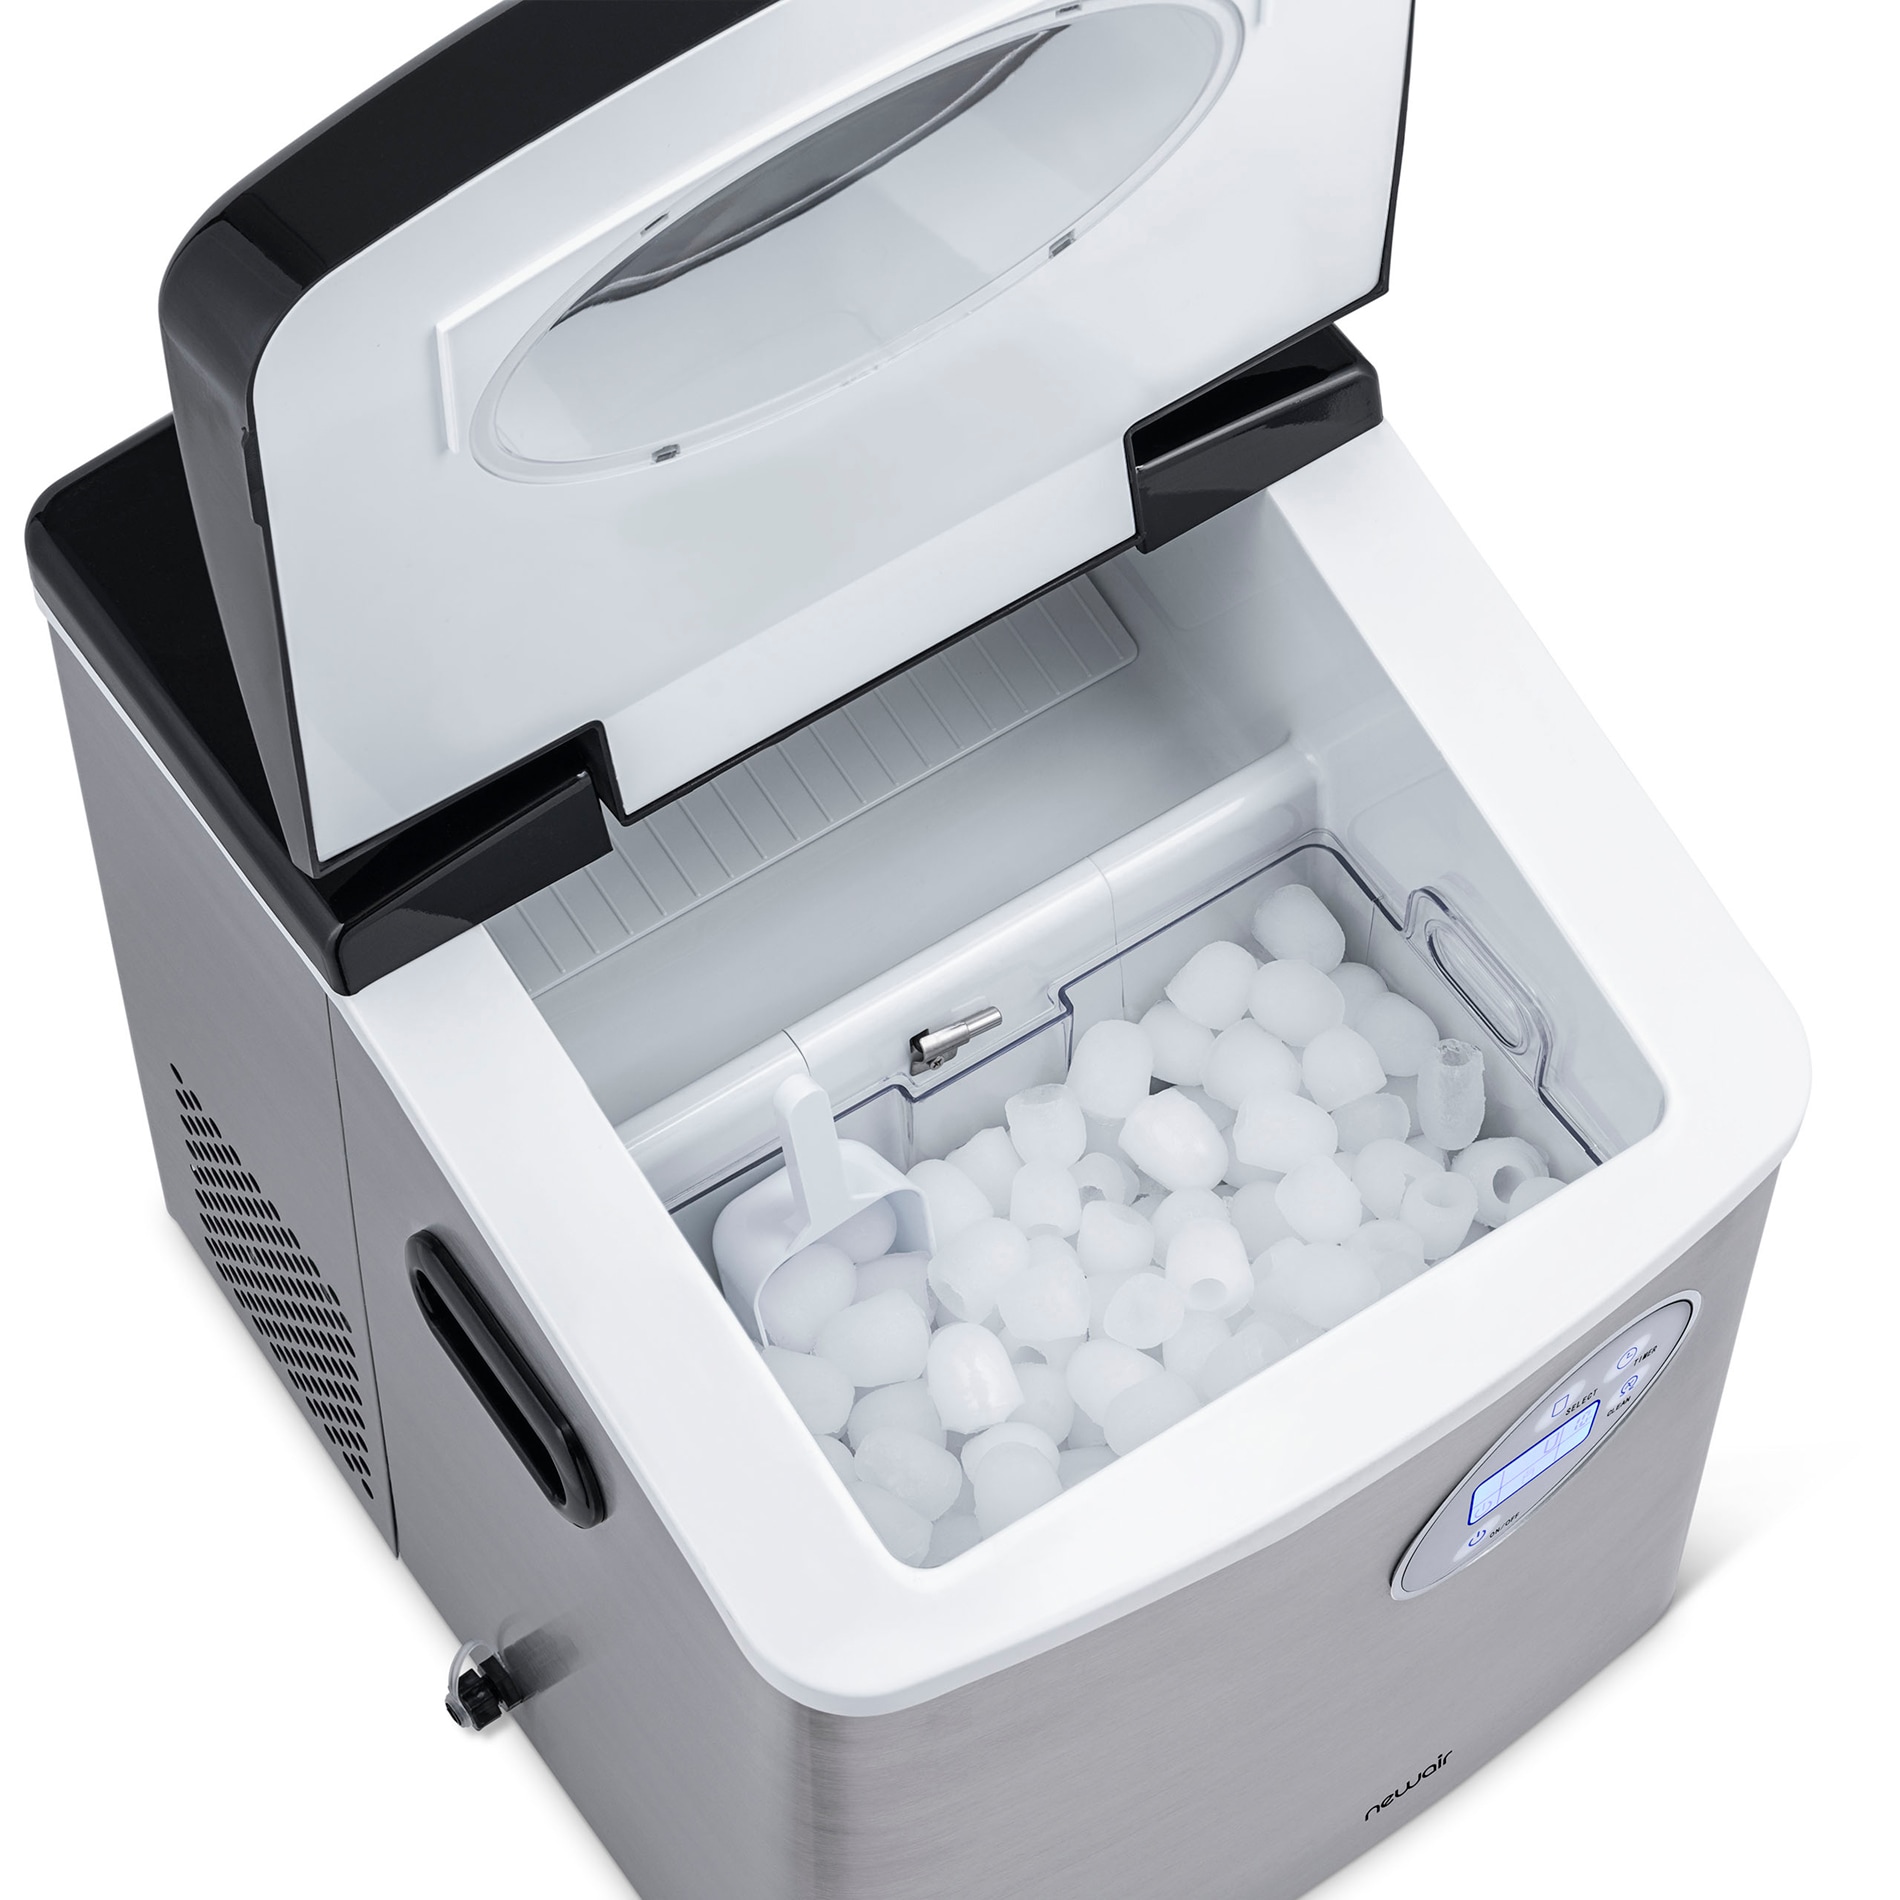 Newair Countertop Ice Maker, 50 Lbs. Of Ice A Day, 3 Ice Sizes And